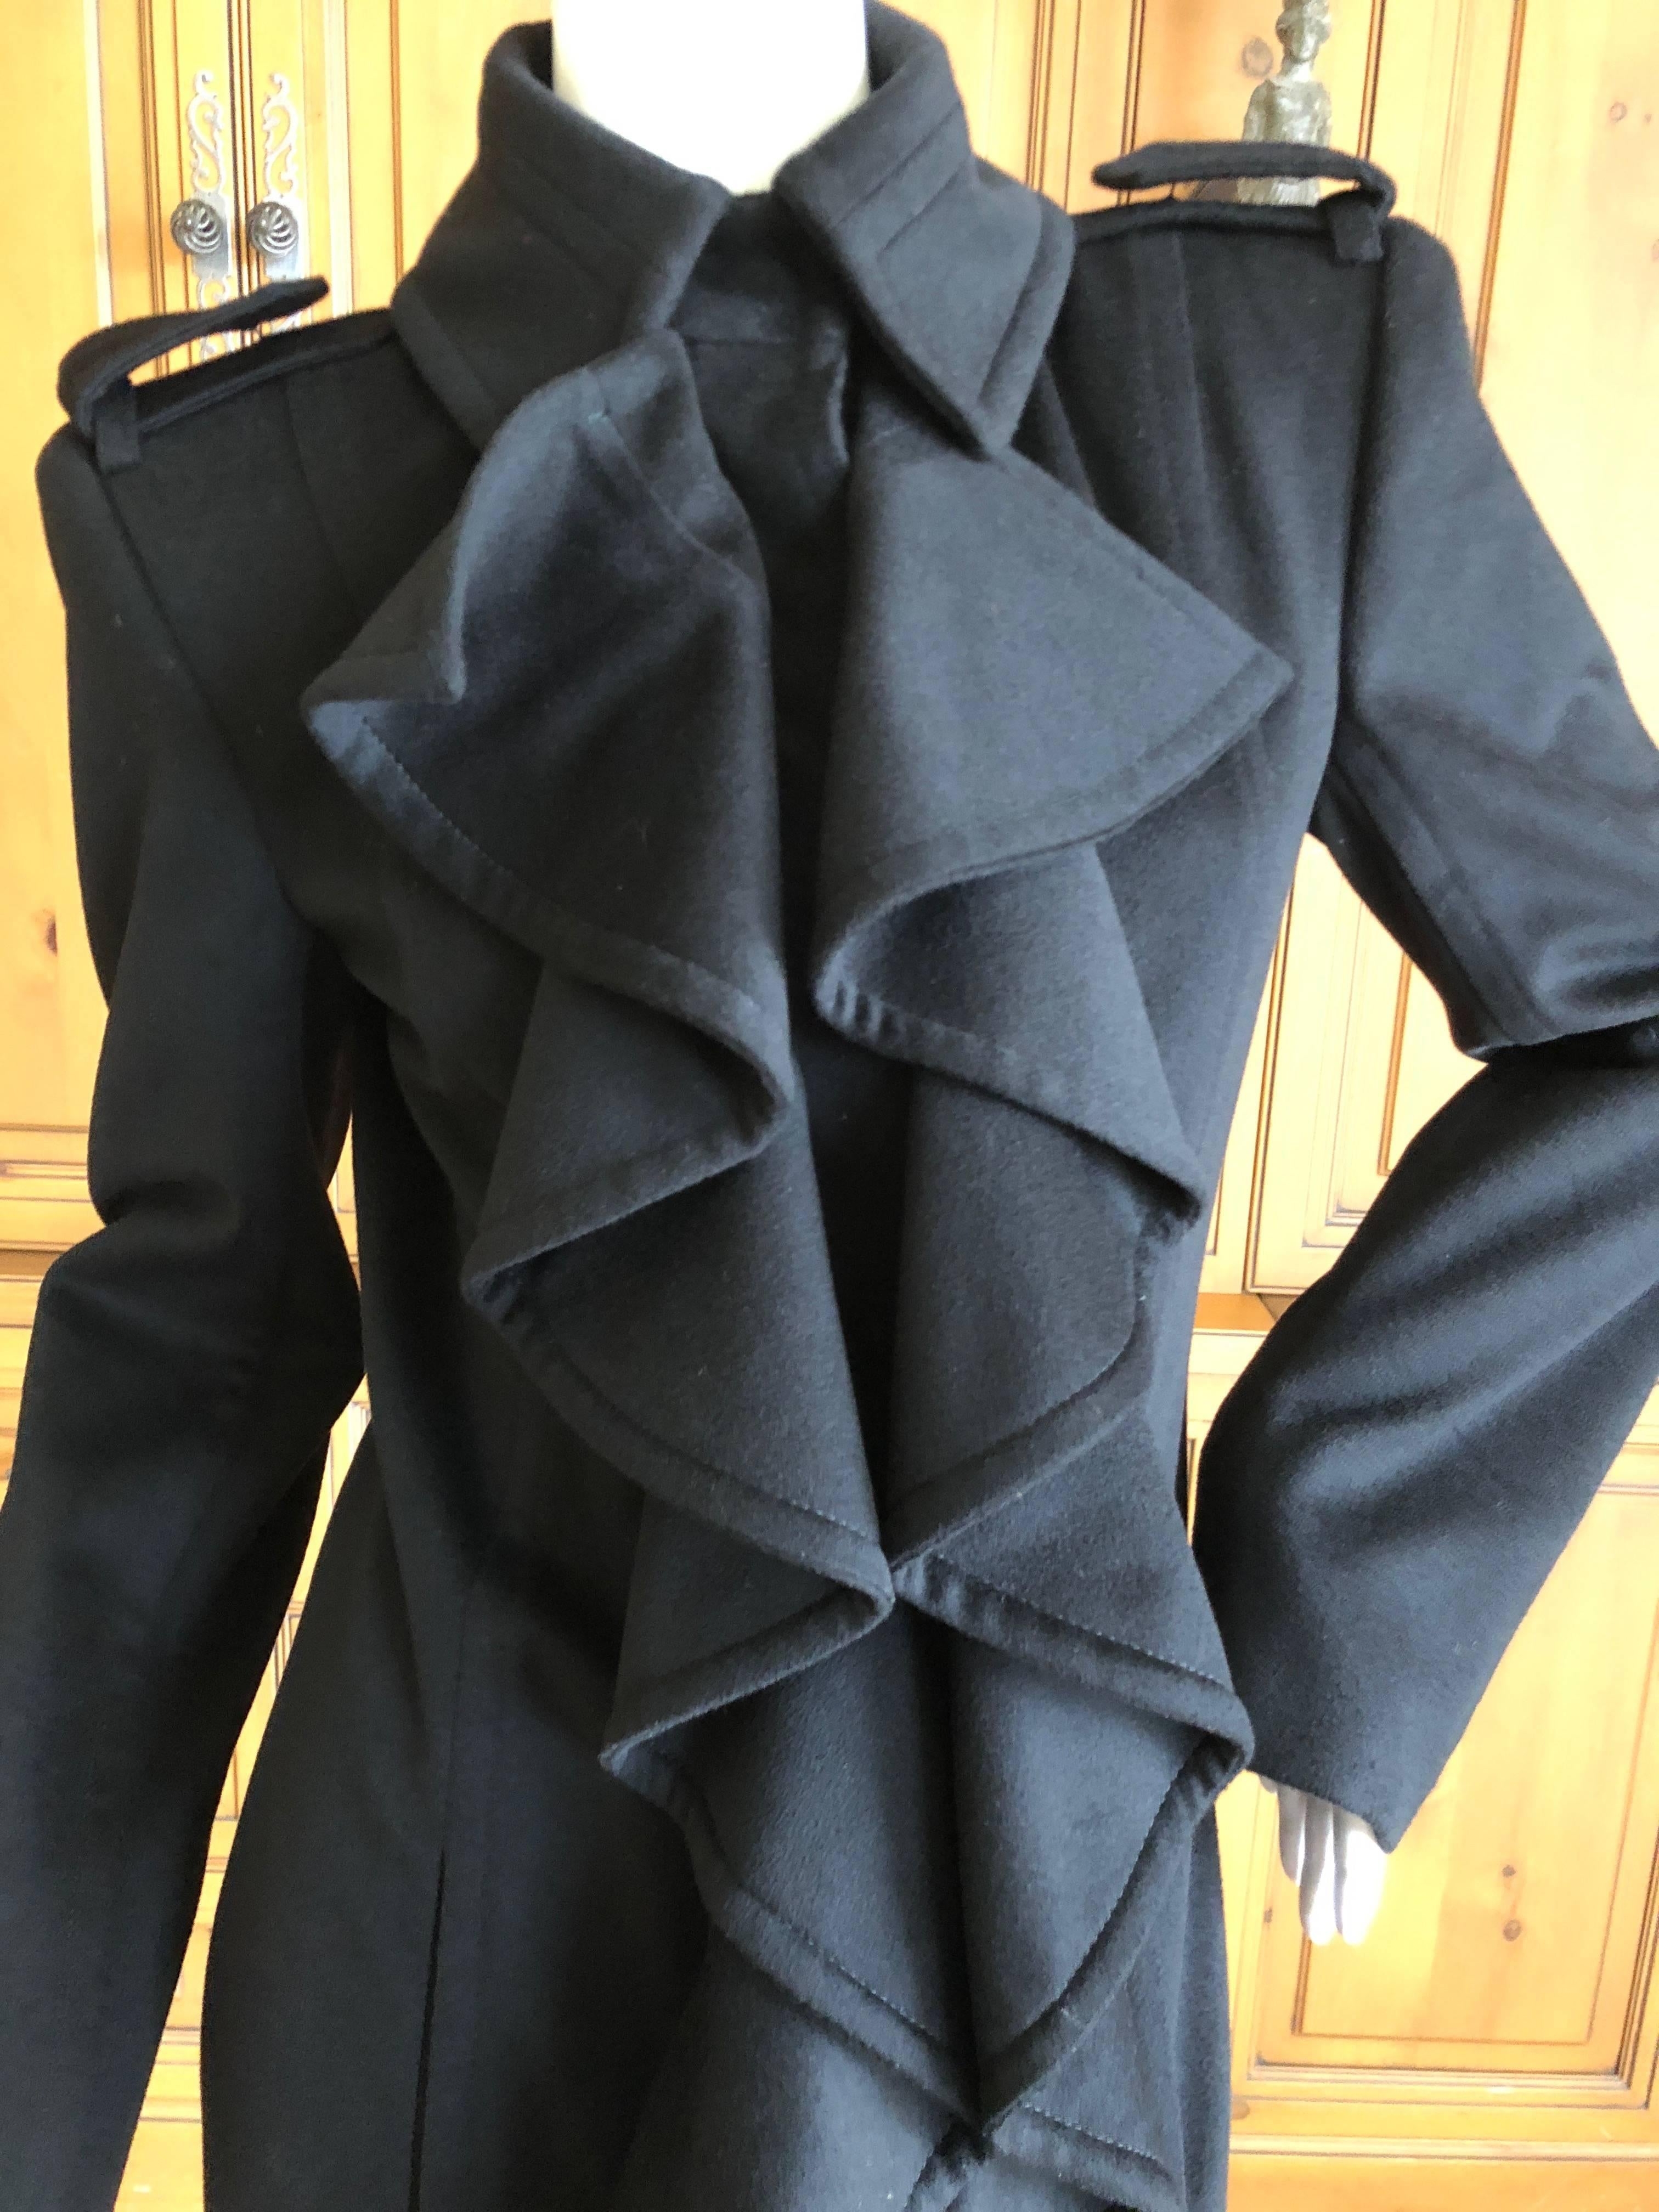 Yves Saint Laurent by Tom Ford Black Wool Ruffle Front Coat from Fall 2004 For Sale 1